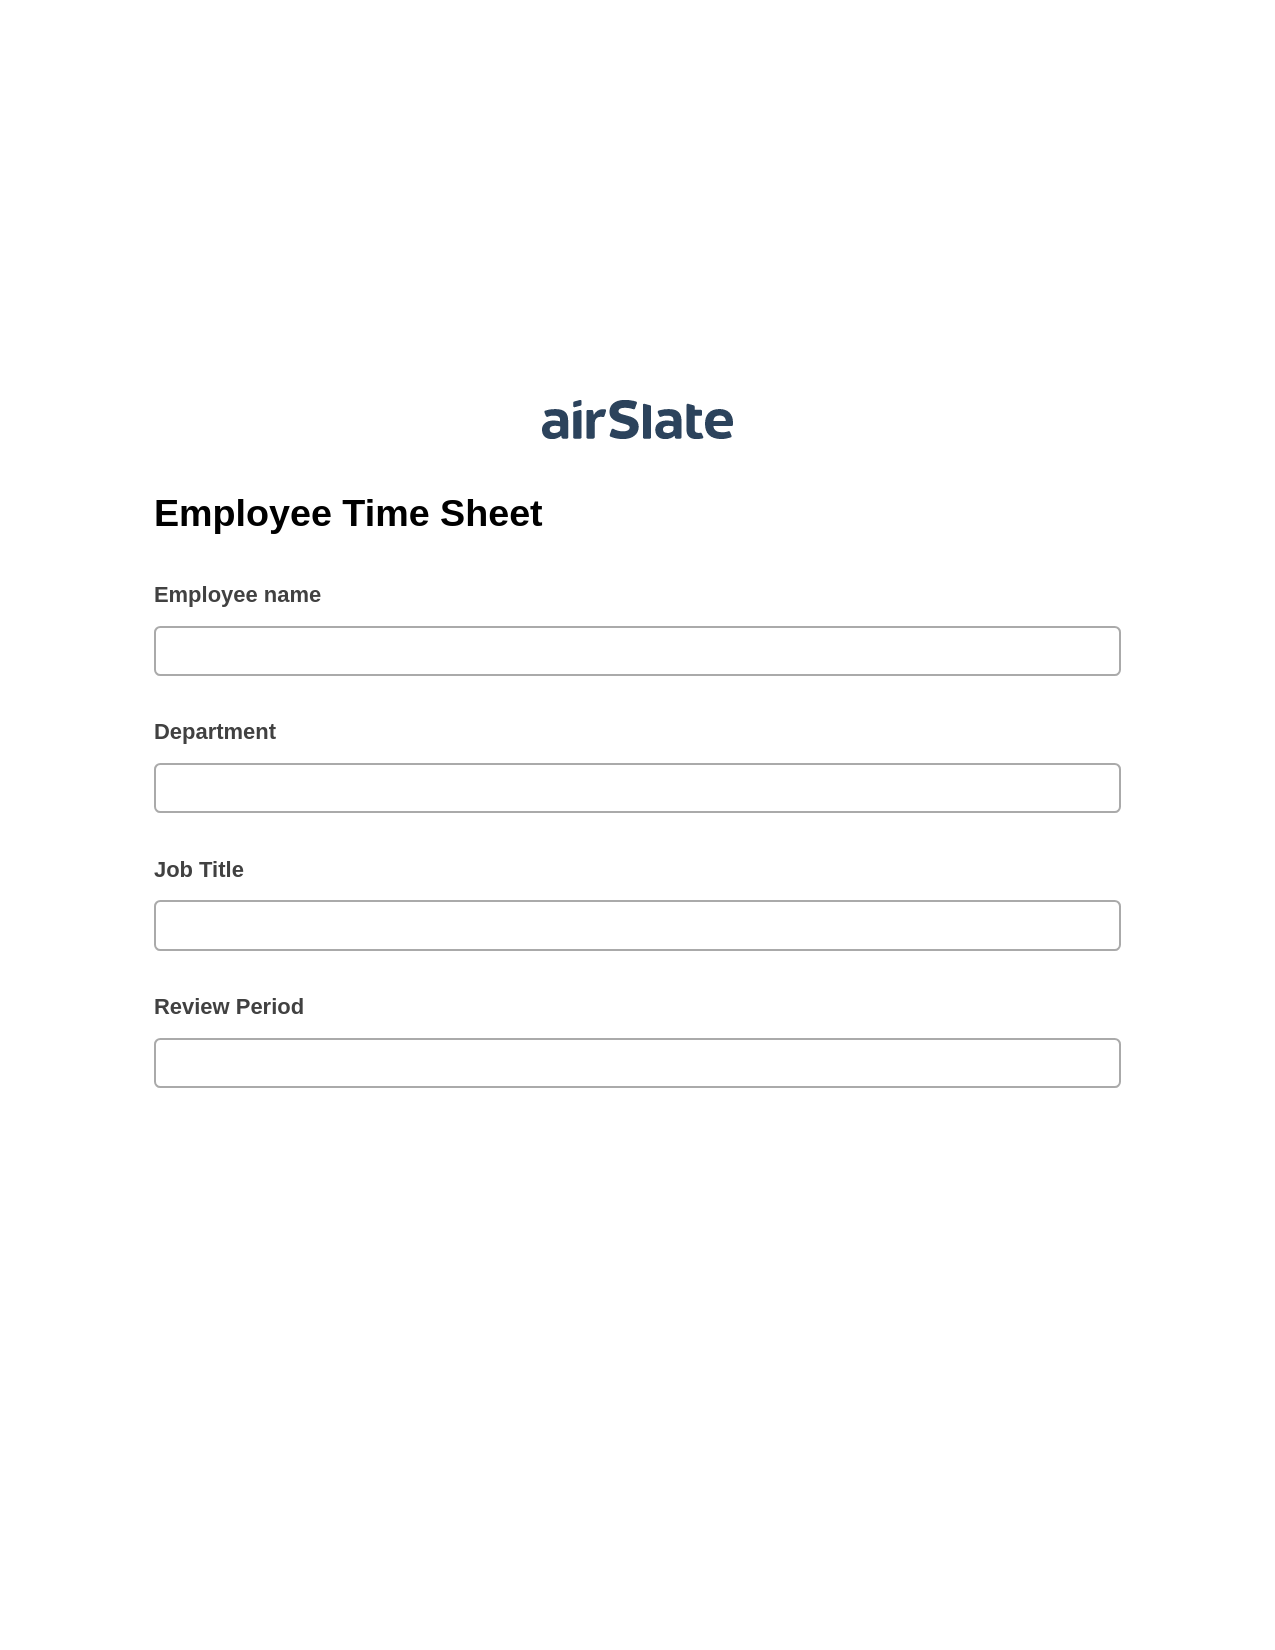 Multirole Employee Time Sheet Pre-fill Dropdowns from CSV file Bot, Rename Slate Bot, Archive to OneDrive Bot